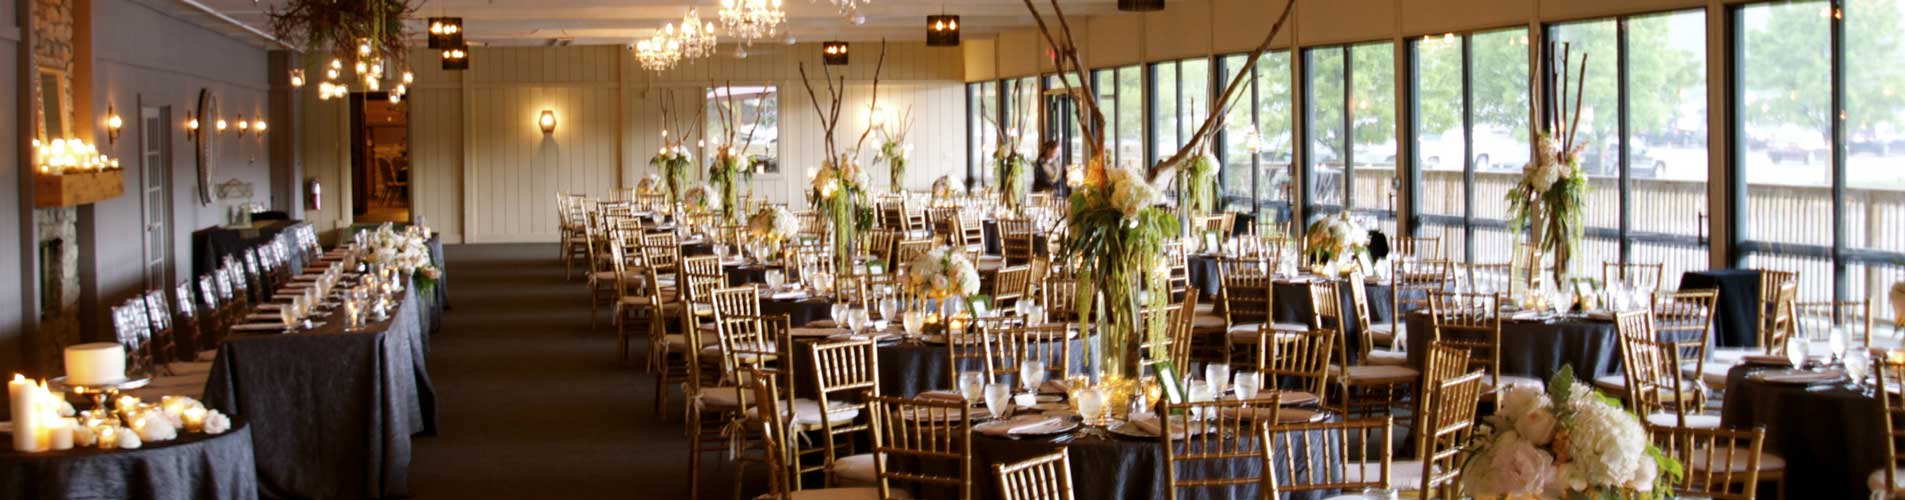 Bohemian and natural themed wedding reception at the lakefront venue of The Lodge at The Willows